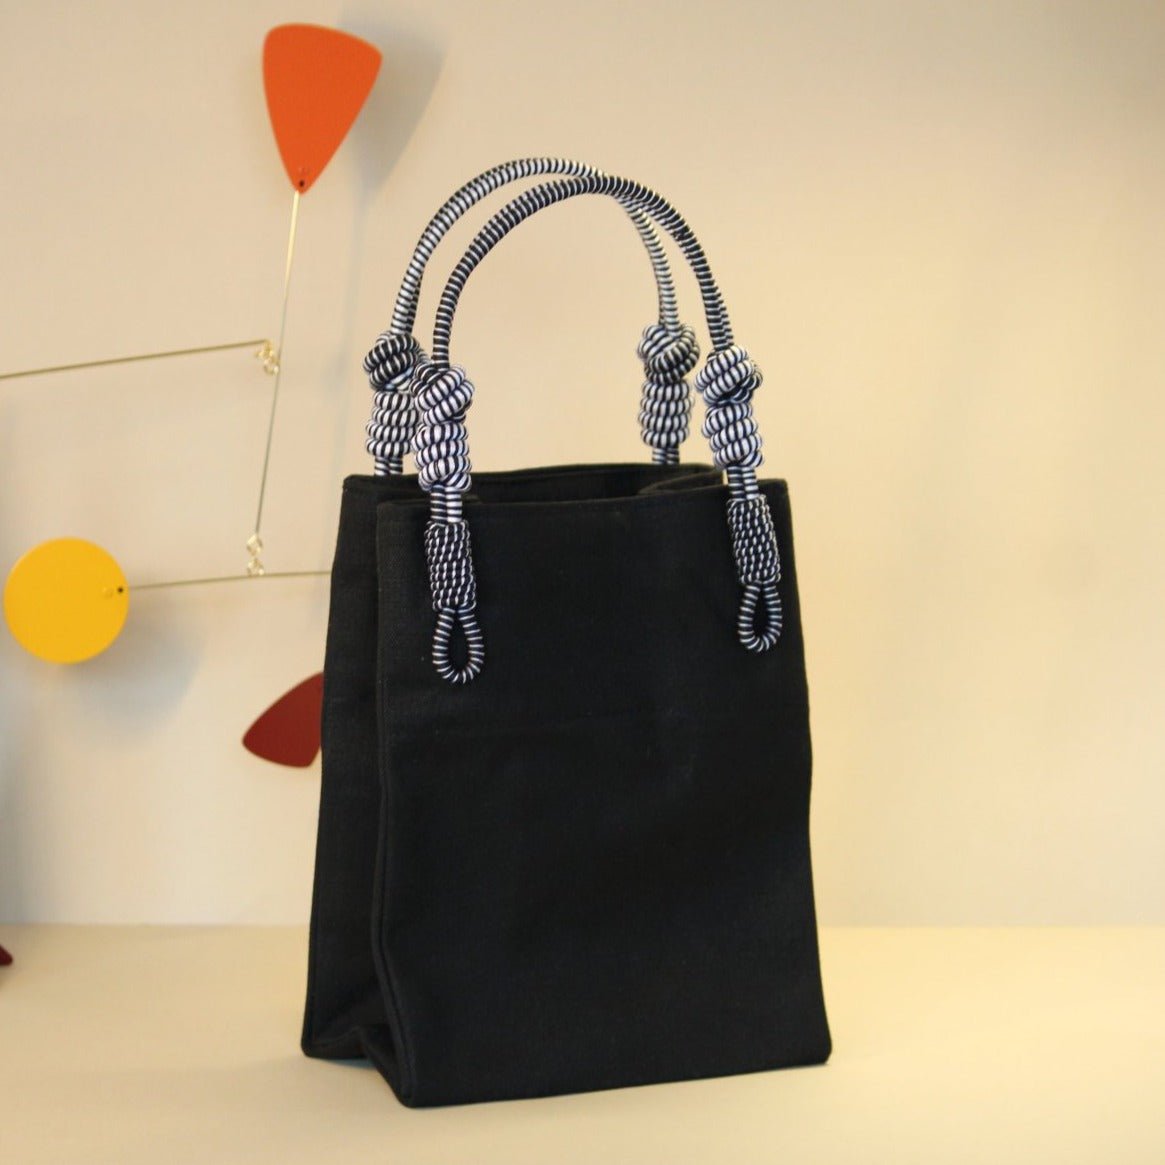 AnimazulSequence CollectionSequence Collection - 2 Knot Handle Small Tote - Black Canvas & Black & White Handle